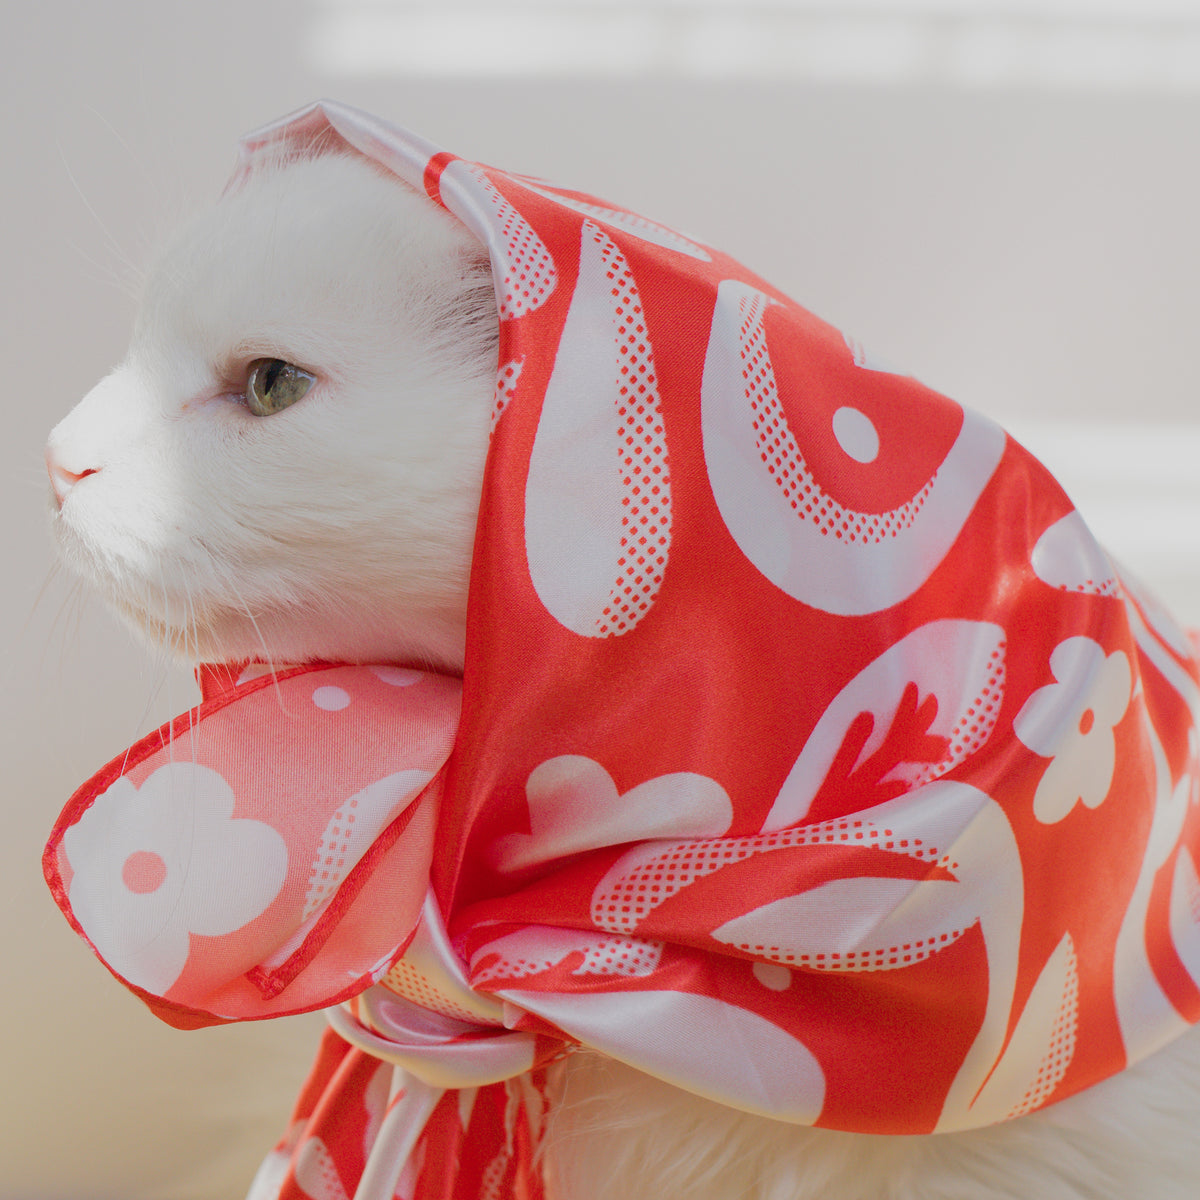 A white cat wearing the scarf tied gently around its head.